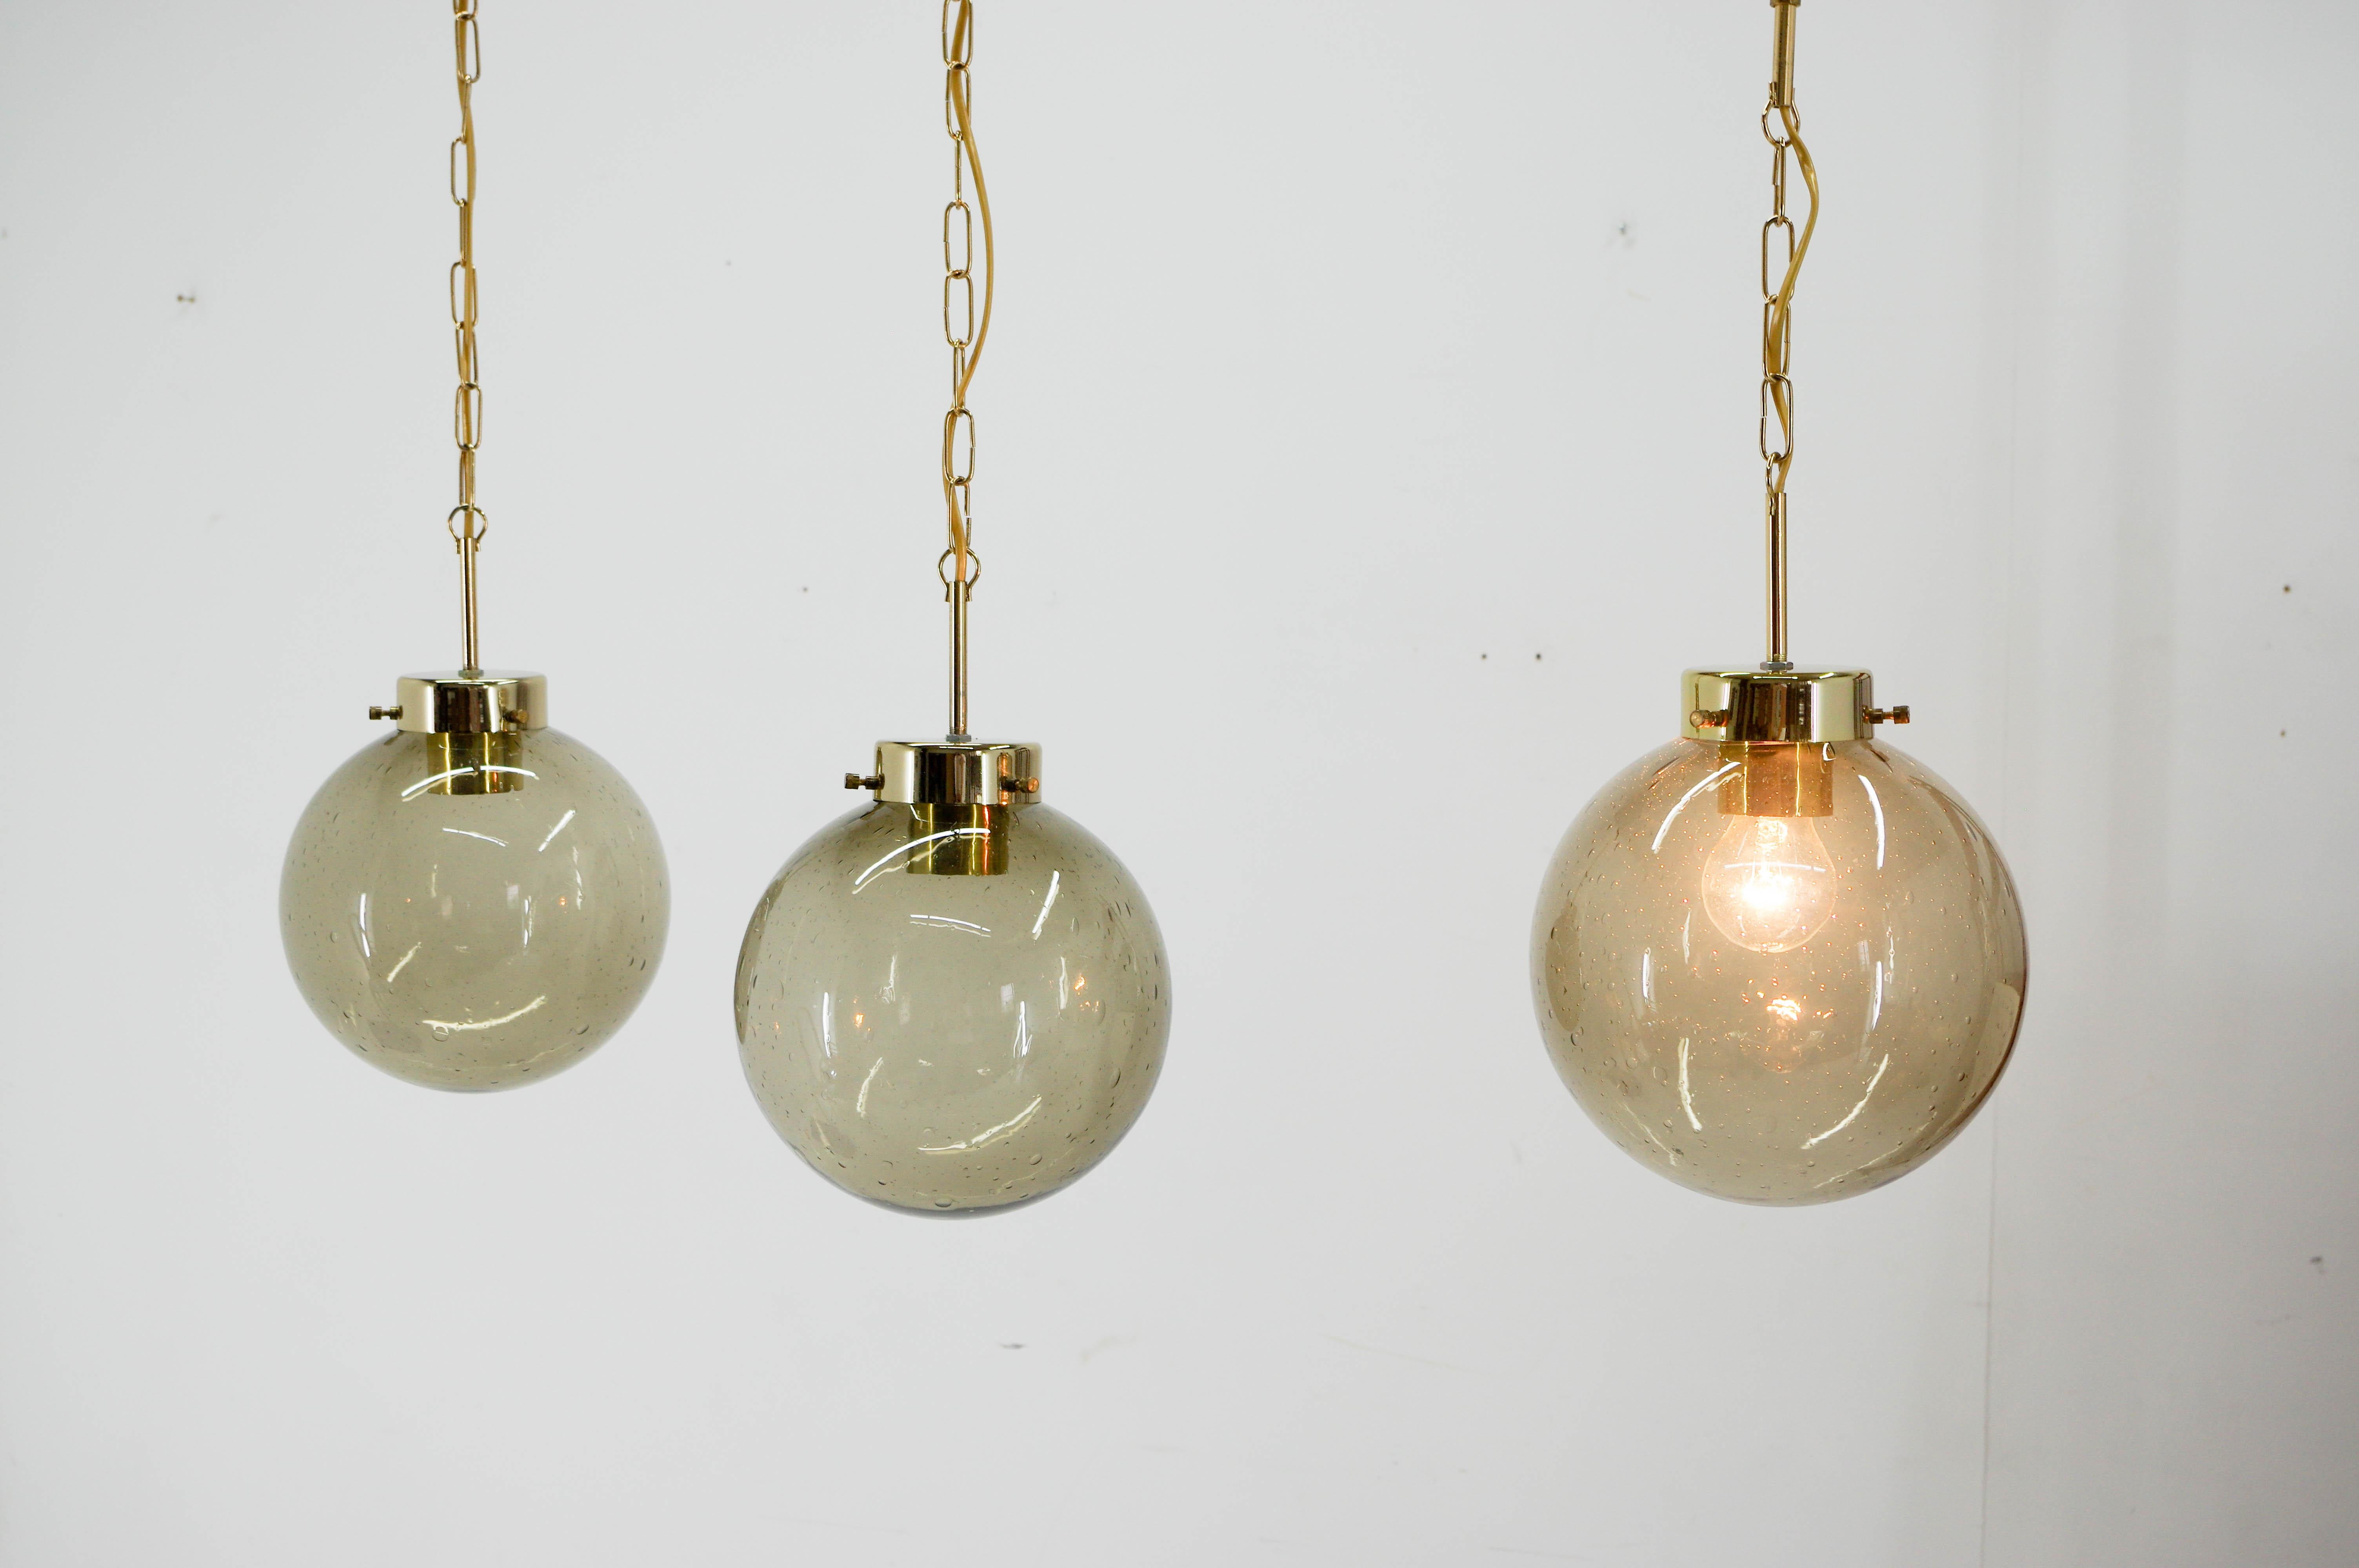 Set of three blown bubble glass pendants in perfect condition.
Total height including chain: 98cm, 80cm, 57cm
Rewired: 40W, E25-E27 bulbs
US wiring compatible